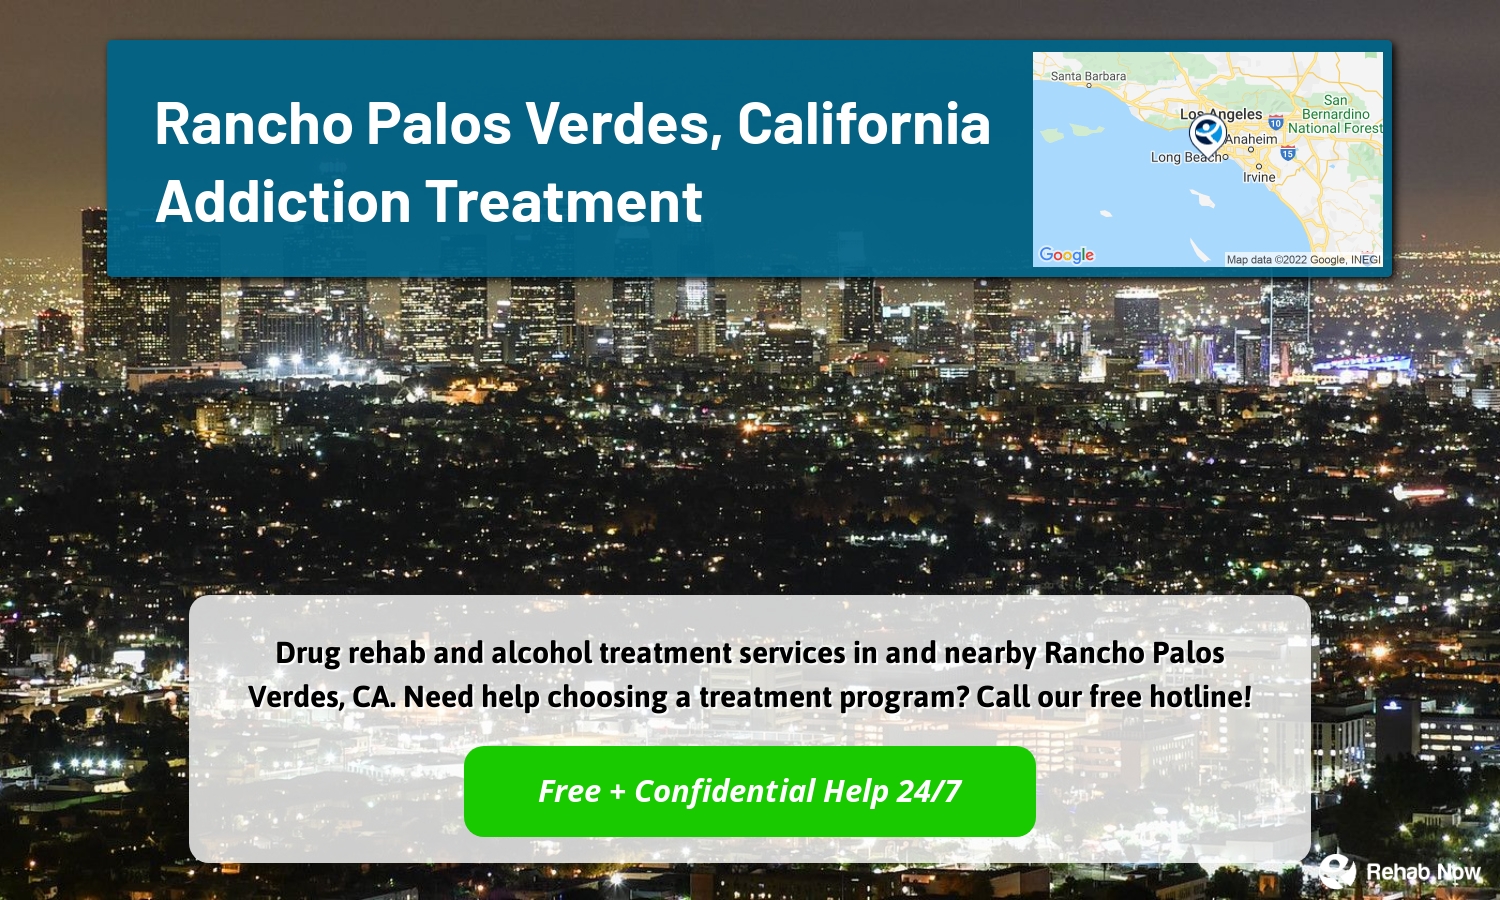 Drug rehab and alcohol treatment services in and nearby Rancho Palos Verdes, CA. Need help choosing a treatment program? Call our free hotline!